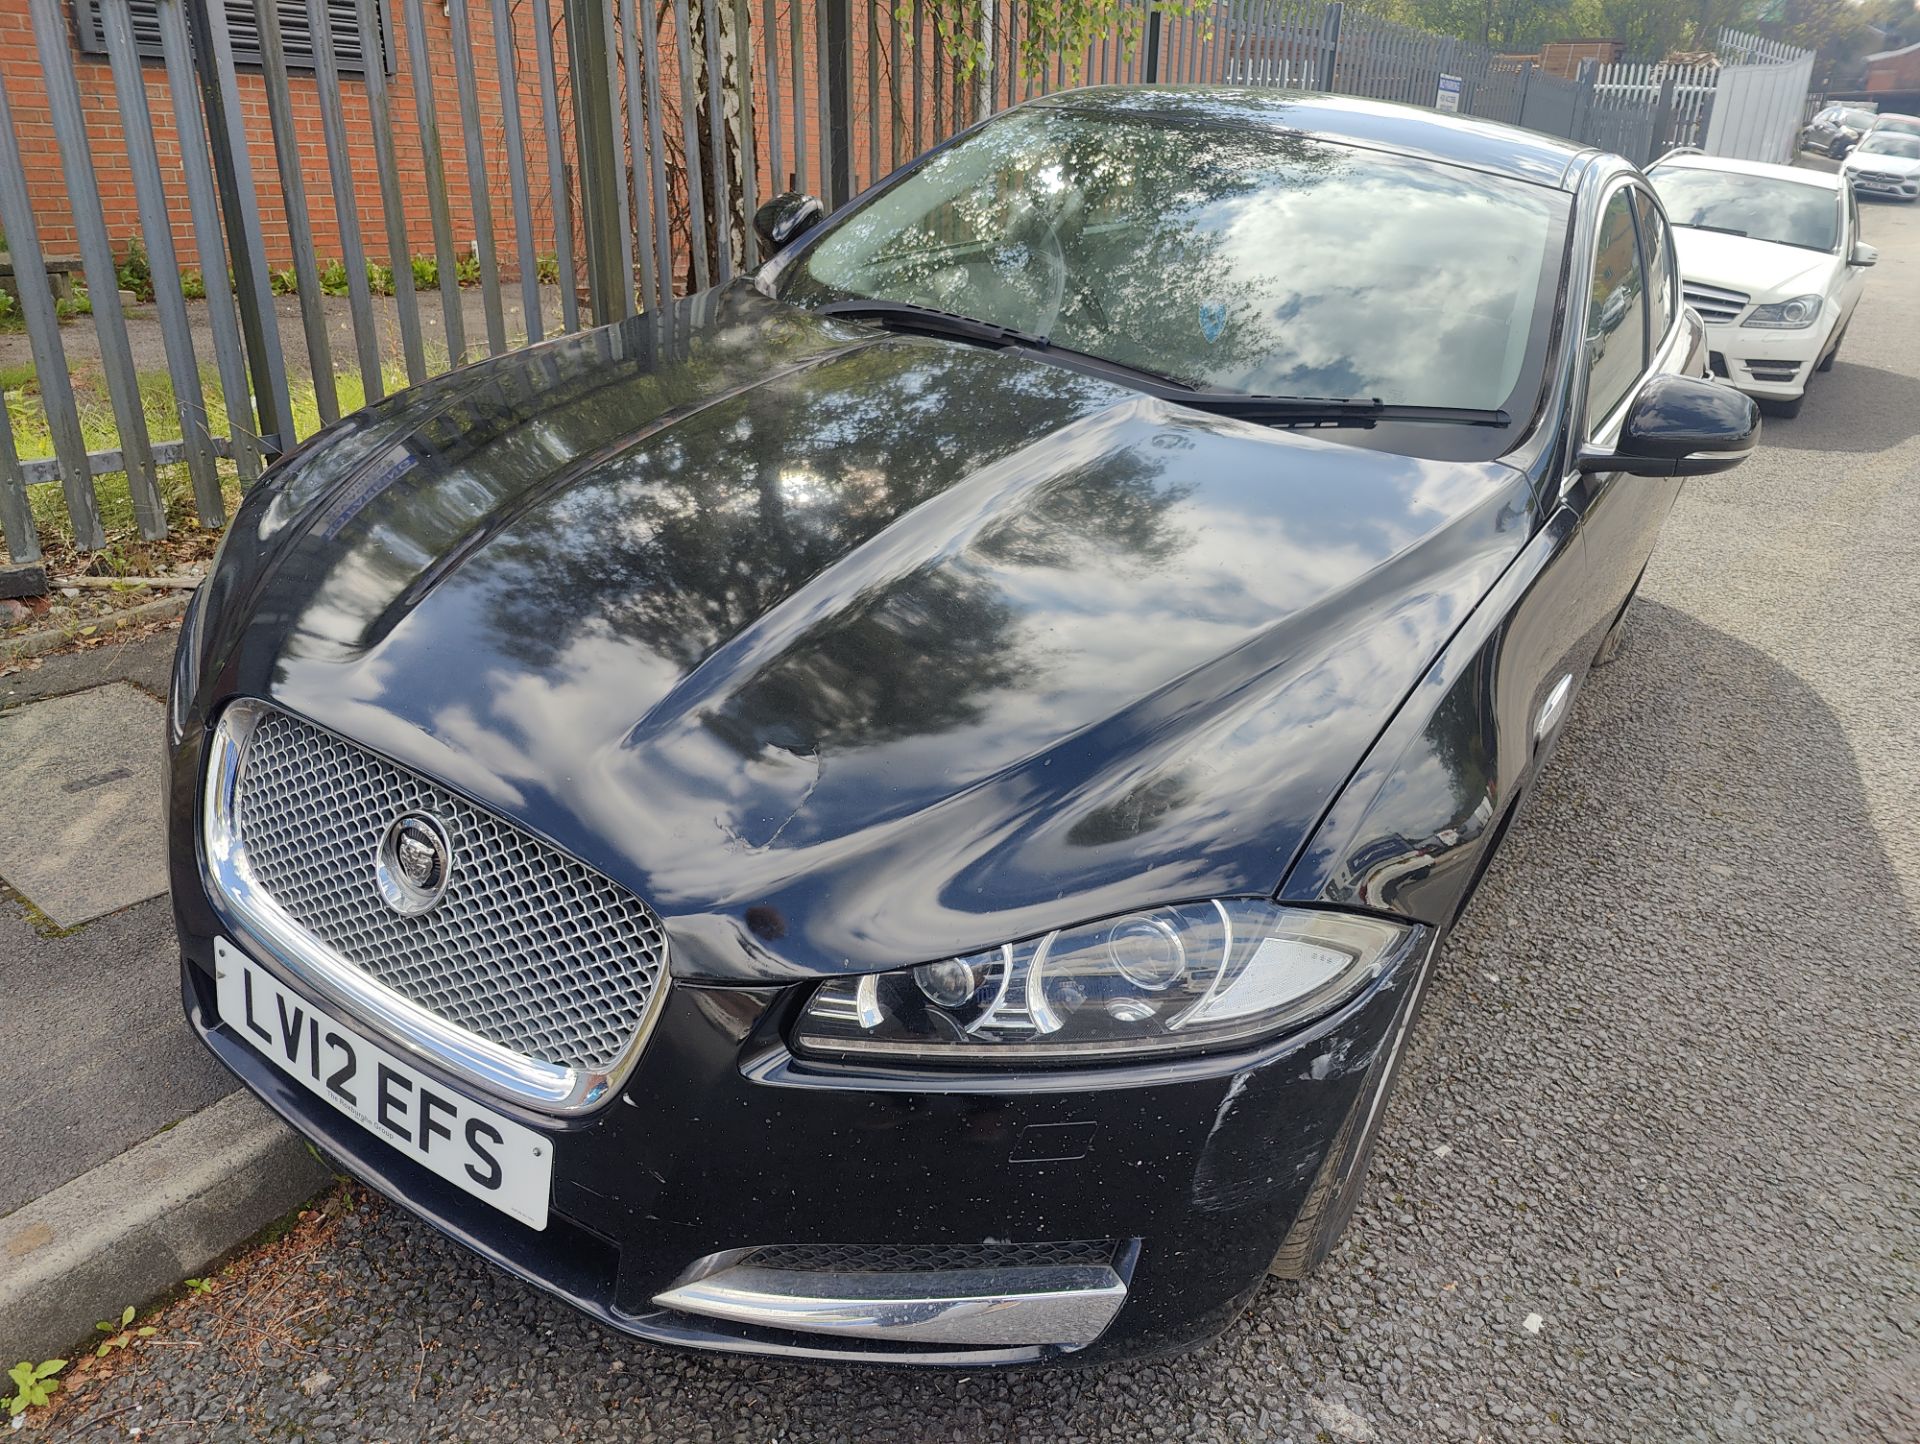 JAGUAR XF DIESEL SALOON 2.2D LUXURY 4DR AUTO 12 MONTHS MOT (NO VAT ON HAMMER) - IN DAILY USE - Image 18 of 19